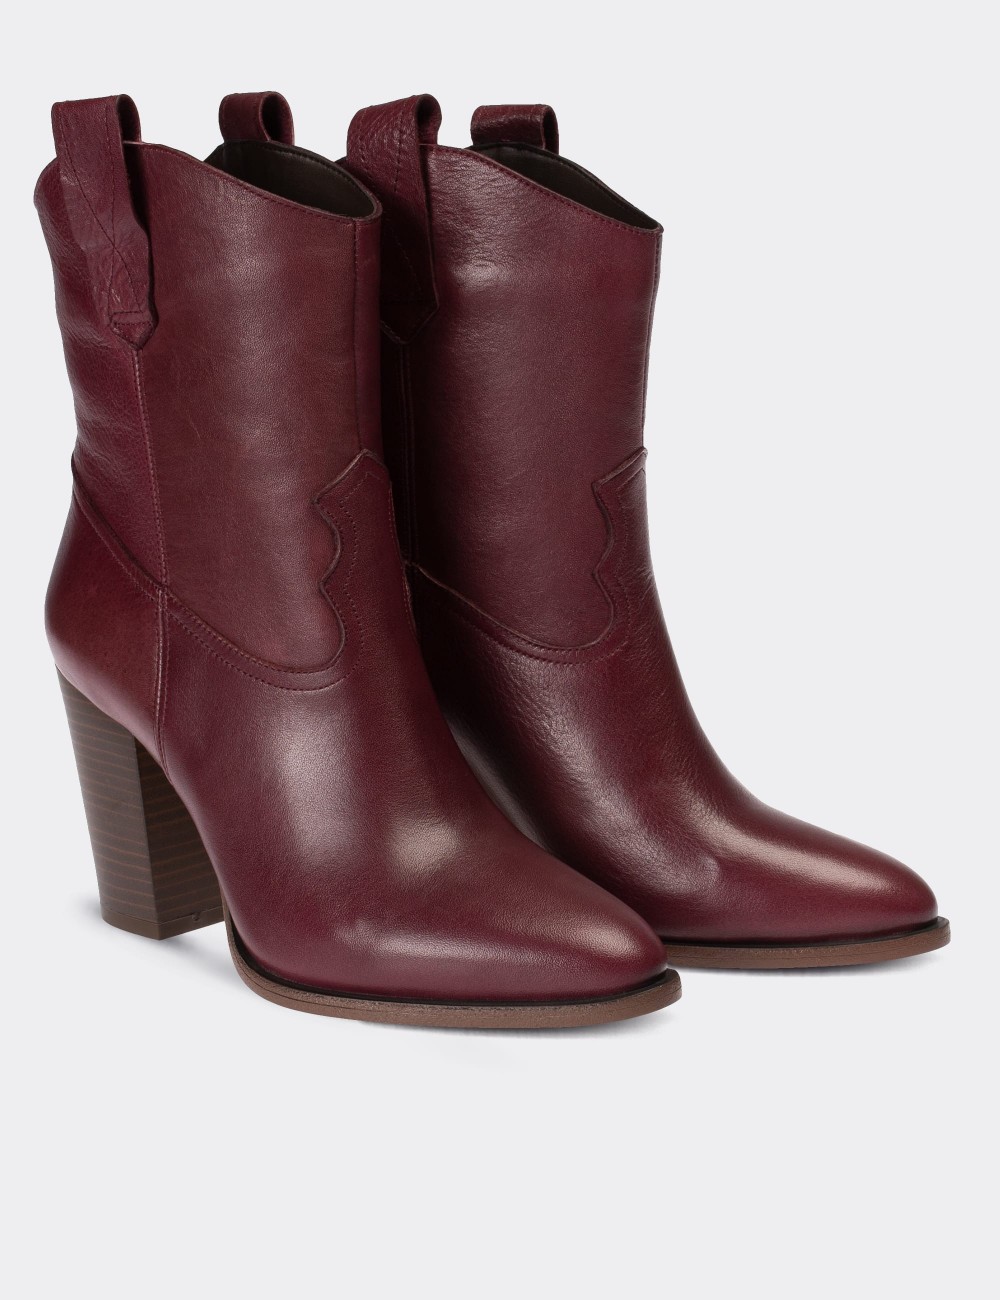 Burgundy  Leather  Boots - E4460ZBRDC02